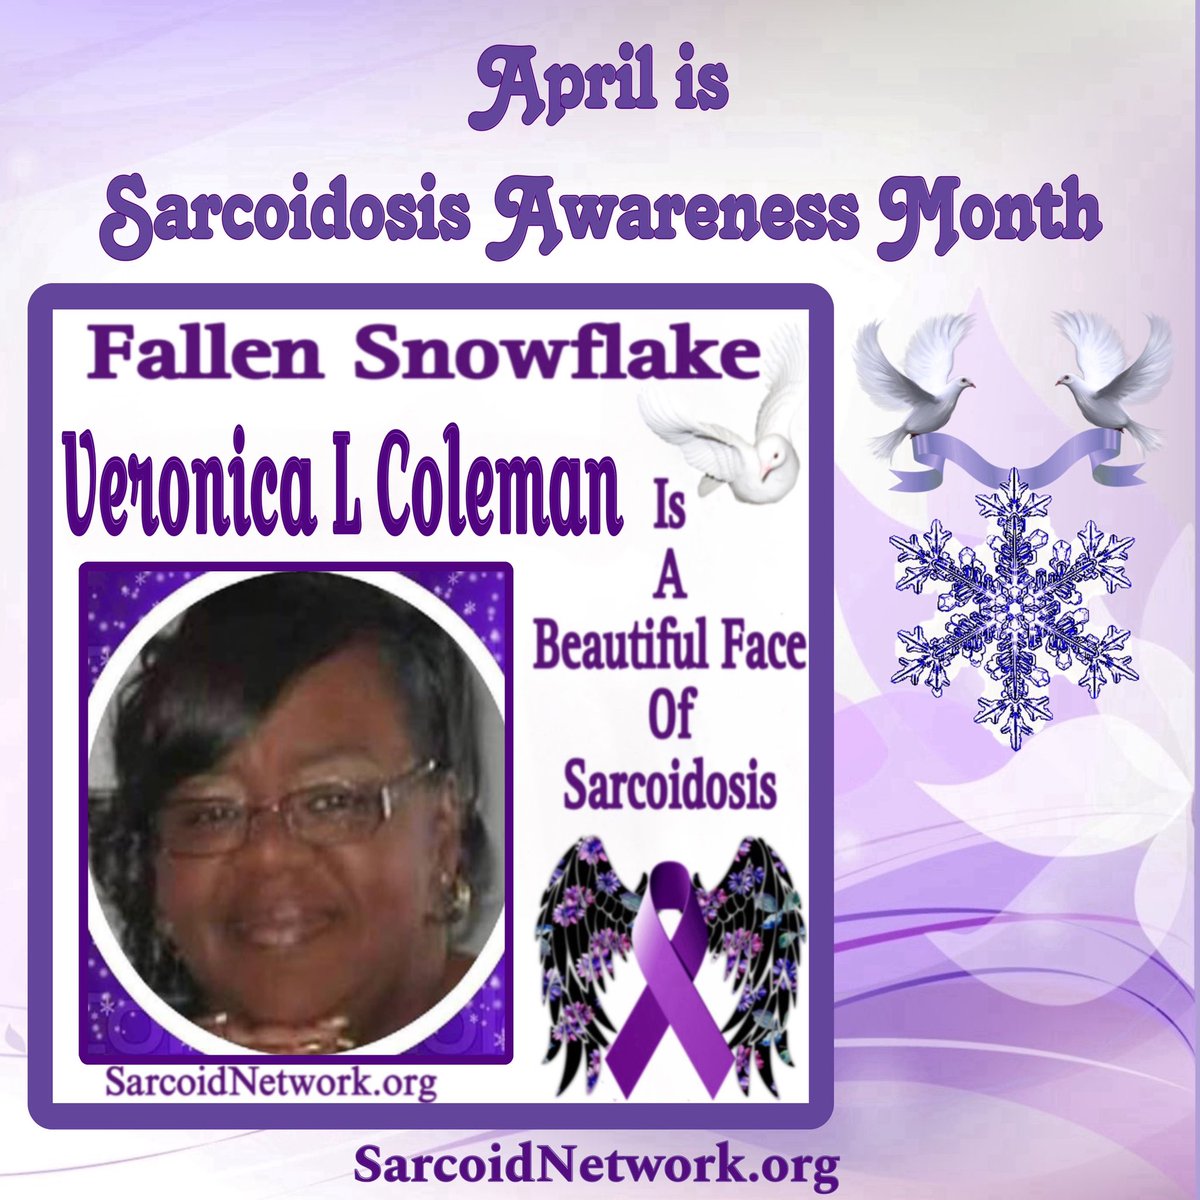 This is our Sarcoidosis Sister Fallen Snowflake Veronica L Coleman and she is a Beautiful Face of Sarcoidosis!💜 #Sarcoidosis #raredisease #preciousmemories #patientadvocate #sarcoidosisadvocate #beautifulfacesofsarcoidosis #sarcoidosisawarenessmonth